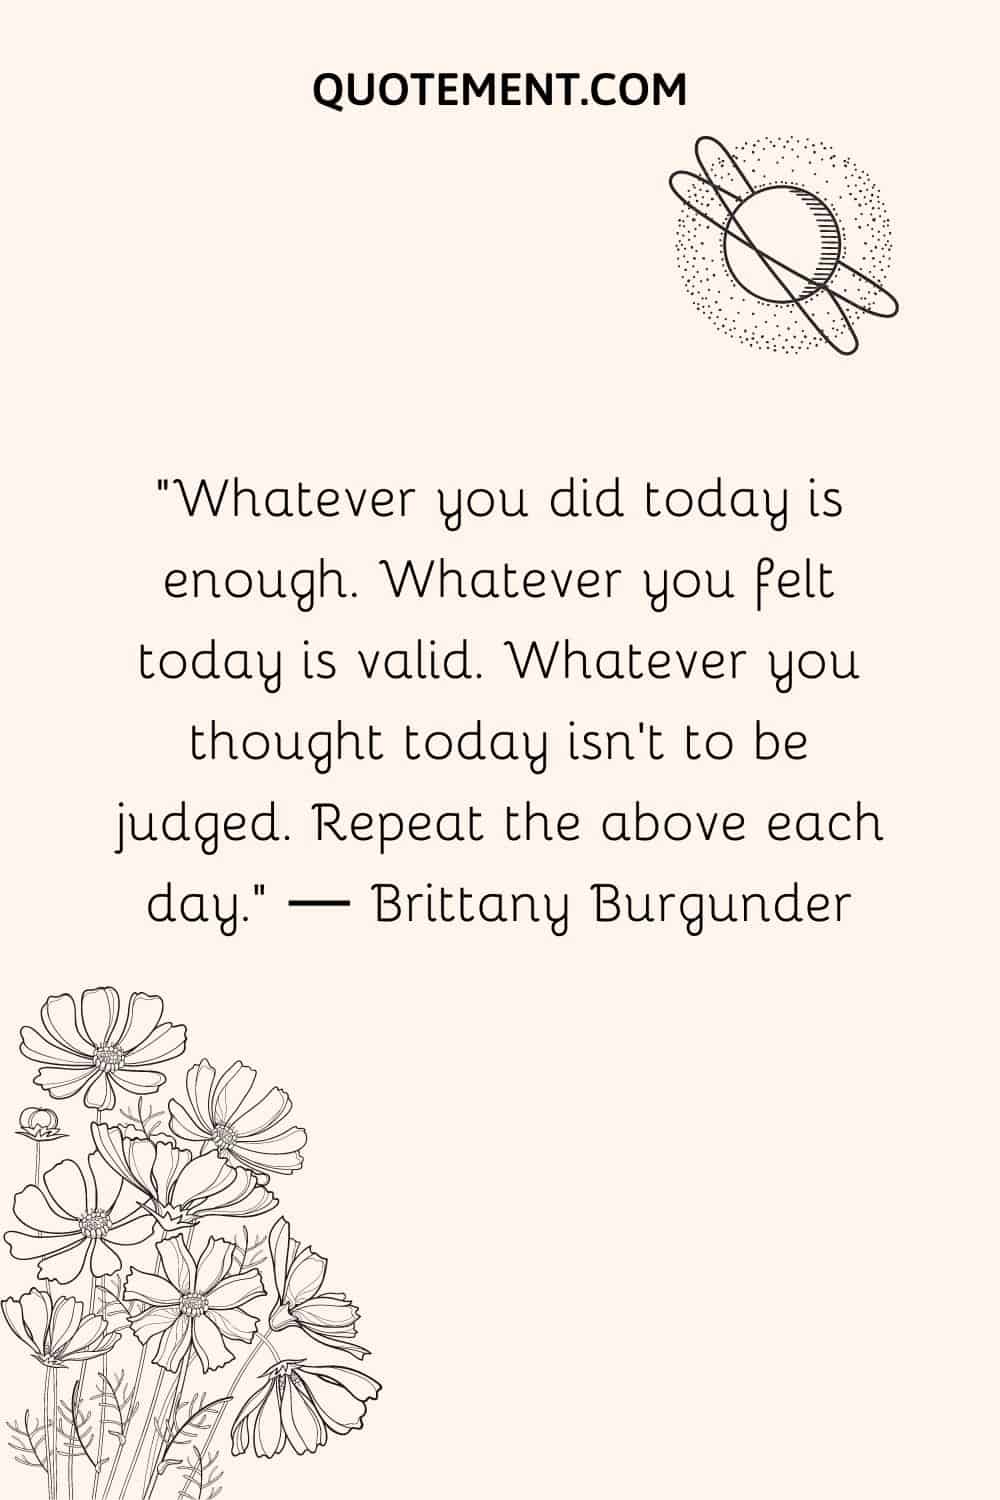 Whatever you did today is enough. Whatever you felt today is valid.